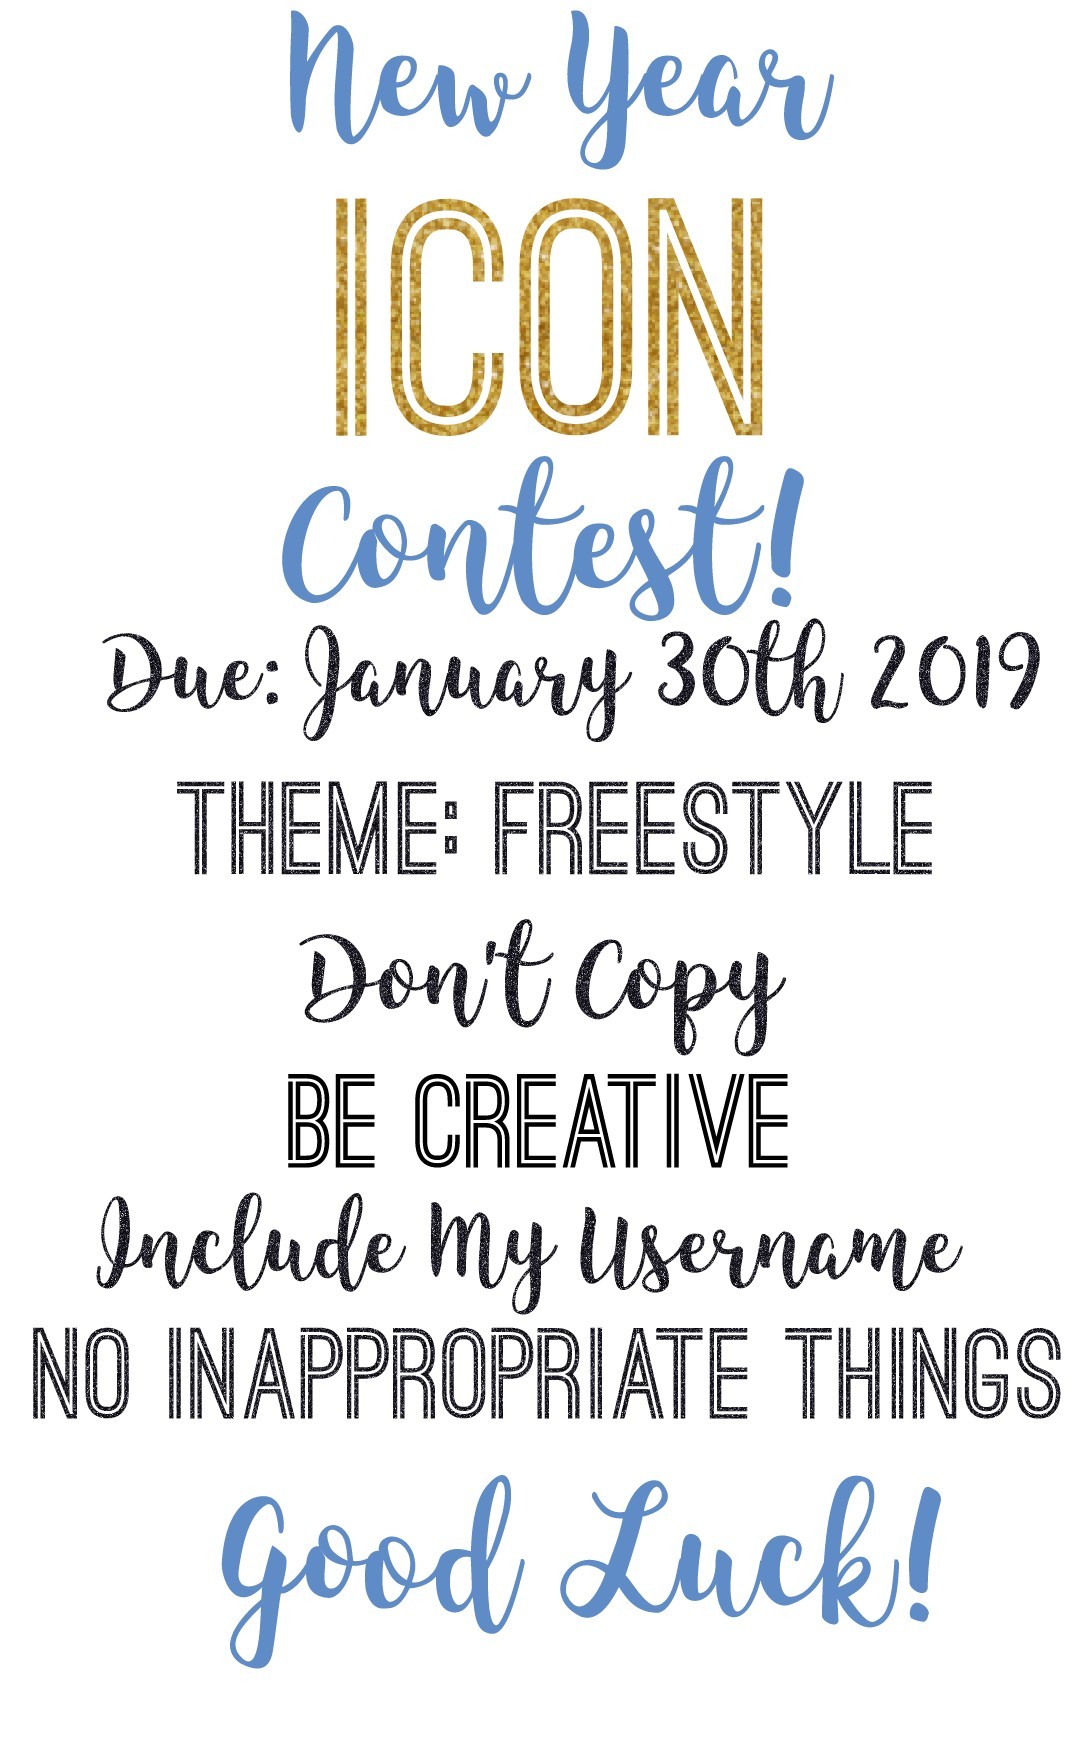 New Year Icon Contest!